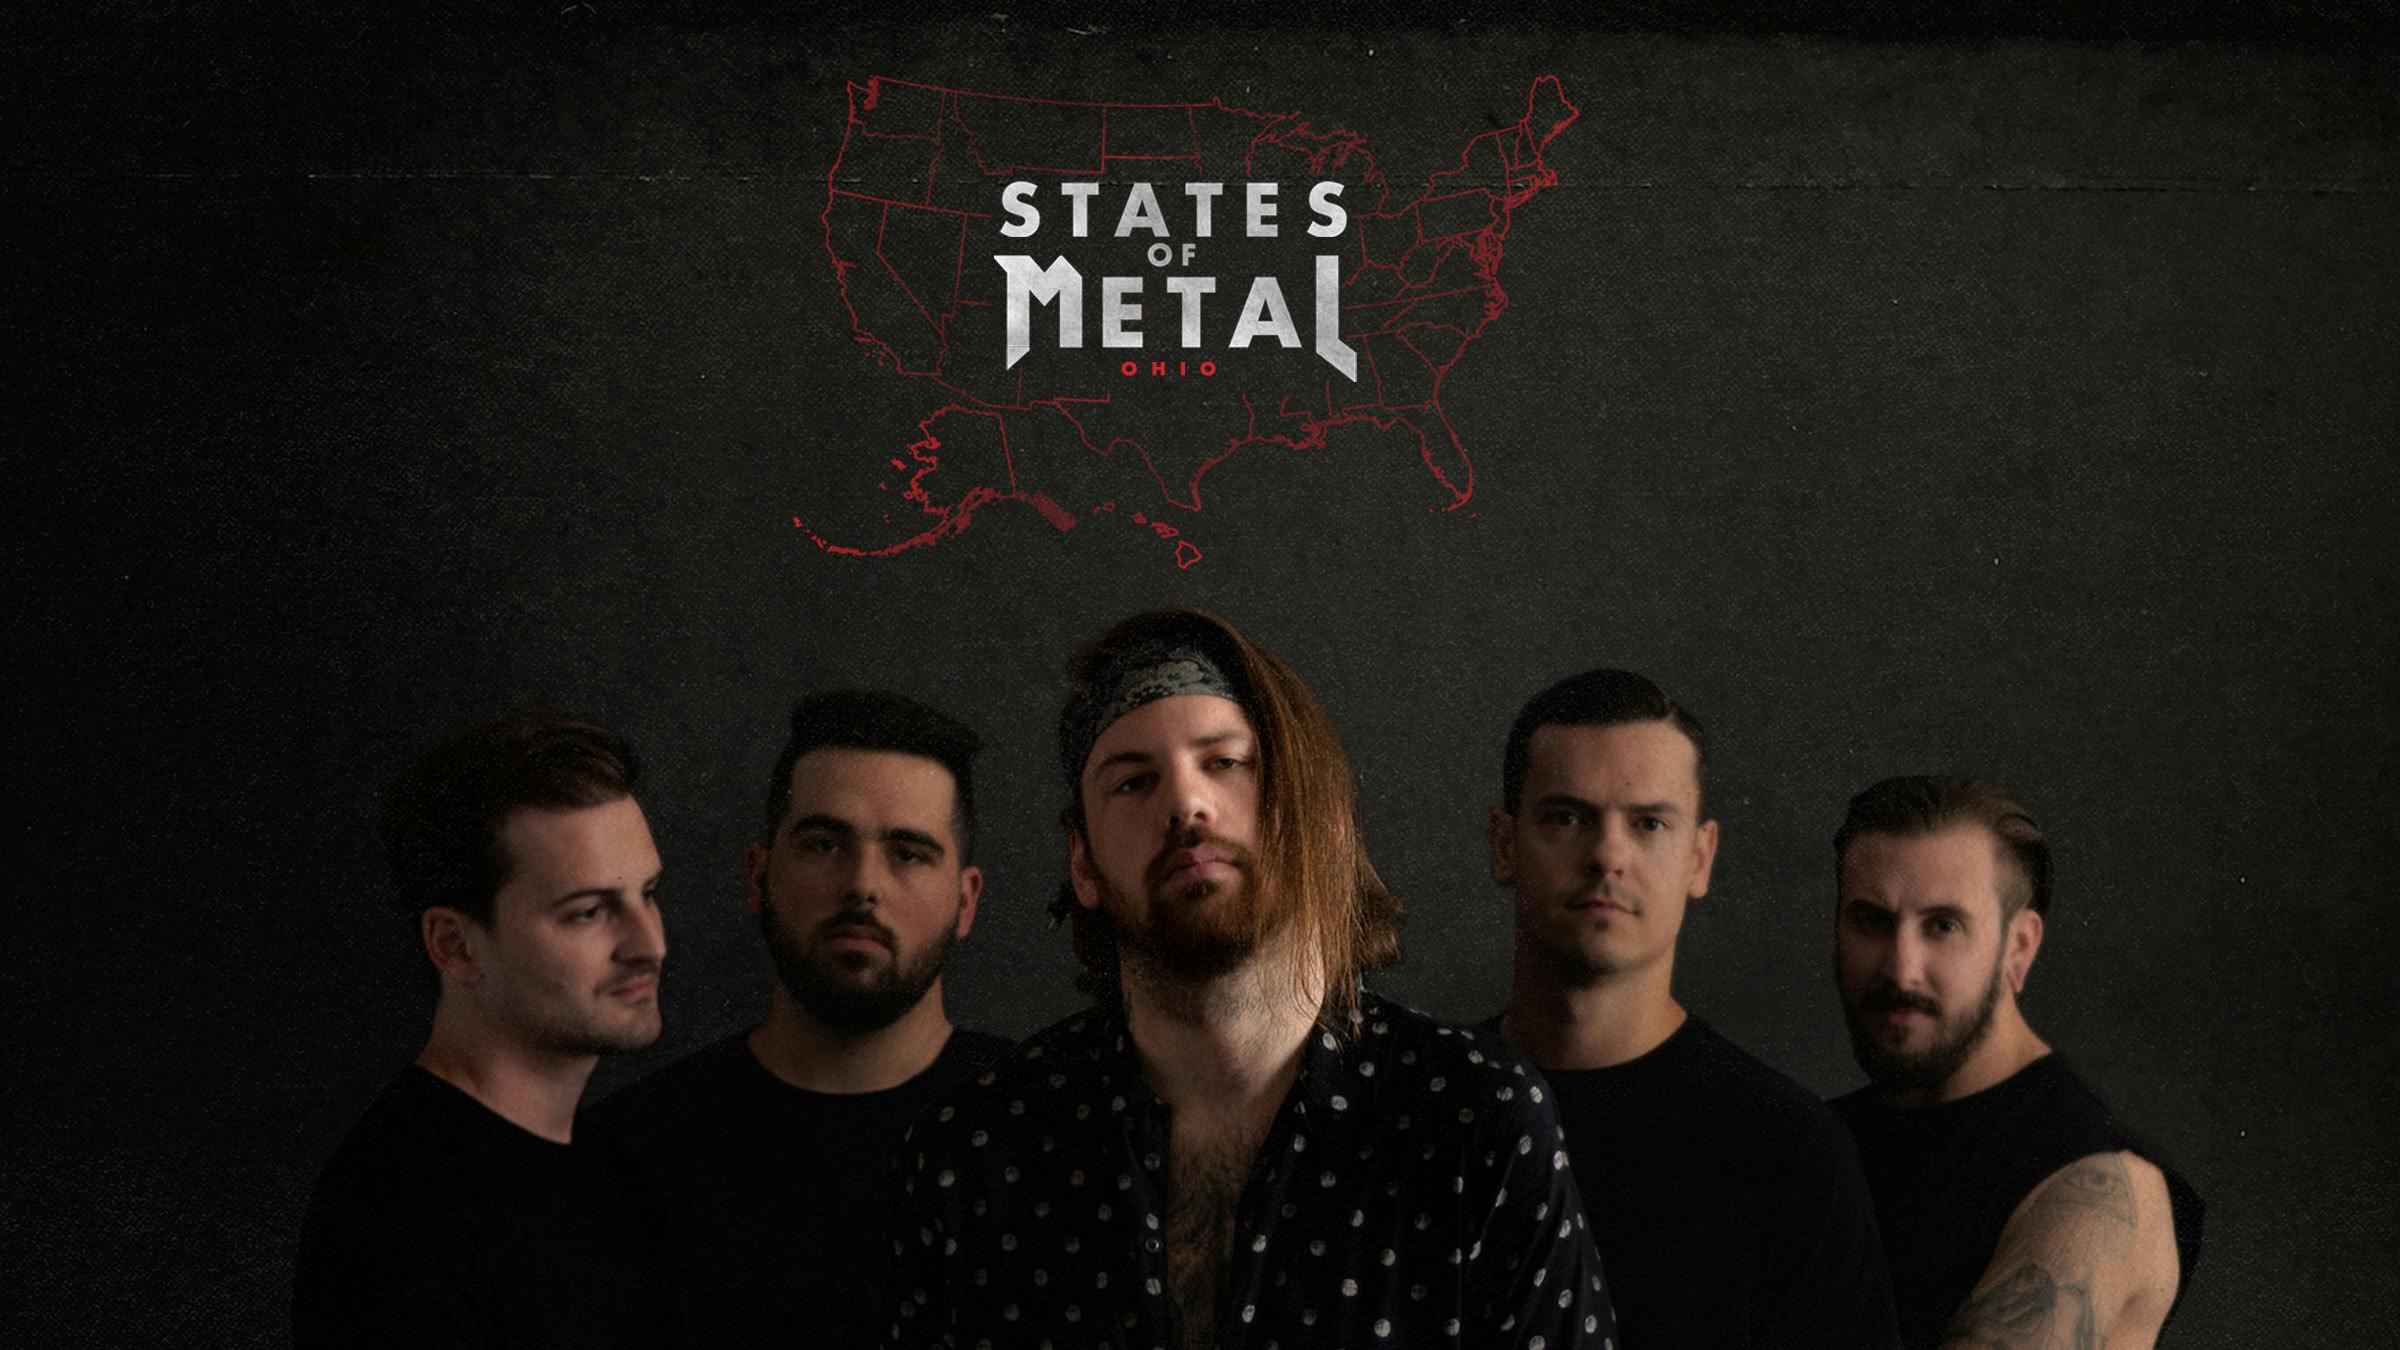 States Of Metal: Ohio Thrives On Grit And Determination